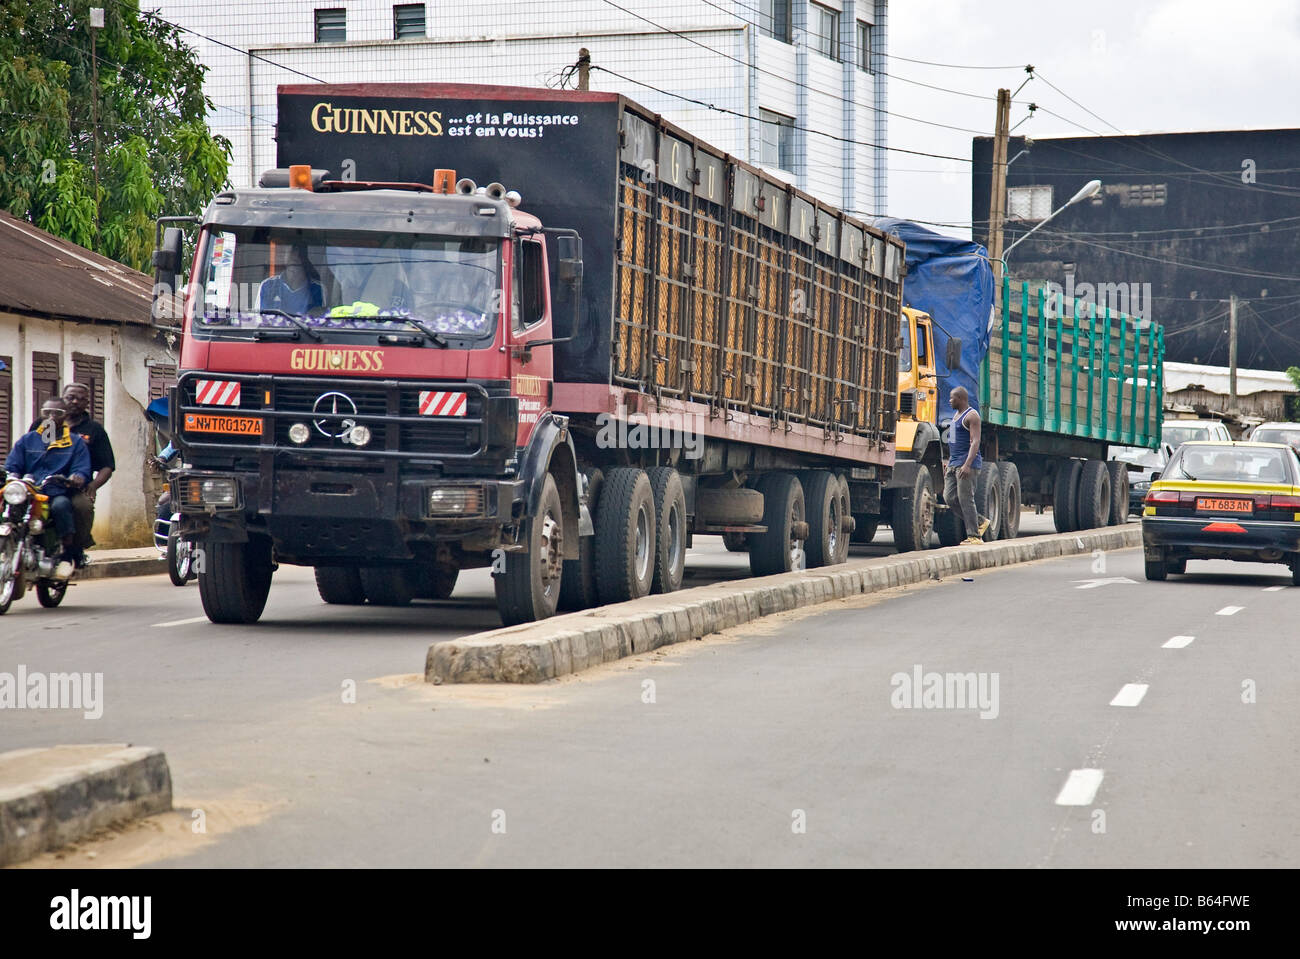 Heavy goods vehicle delivering Guiness in traffic, Douala, Cameroon, Africa Stock Photo